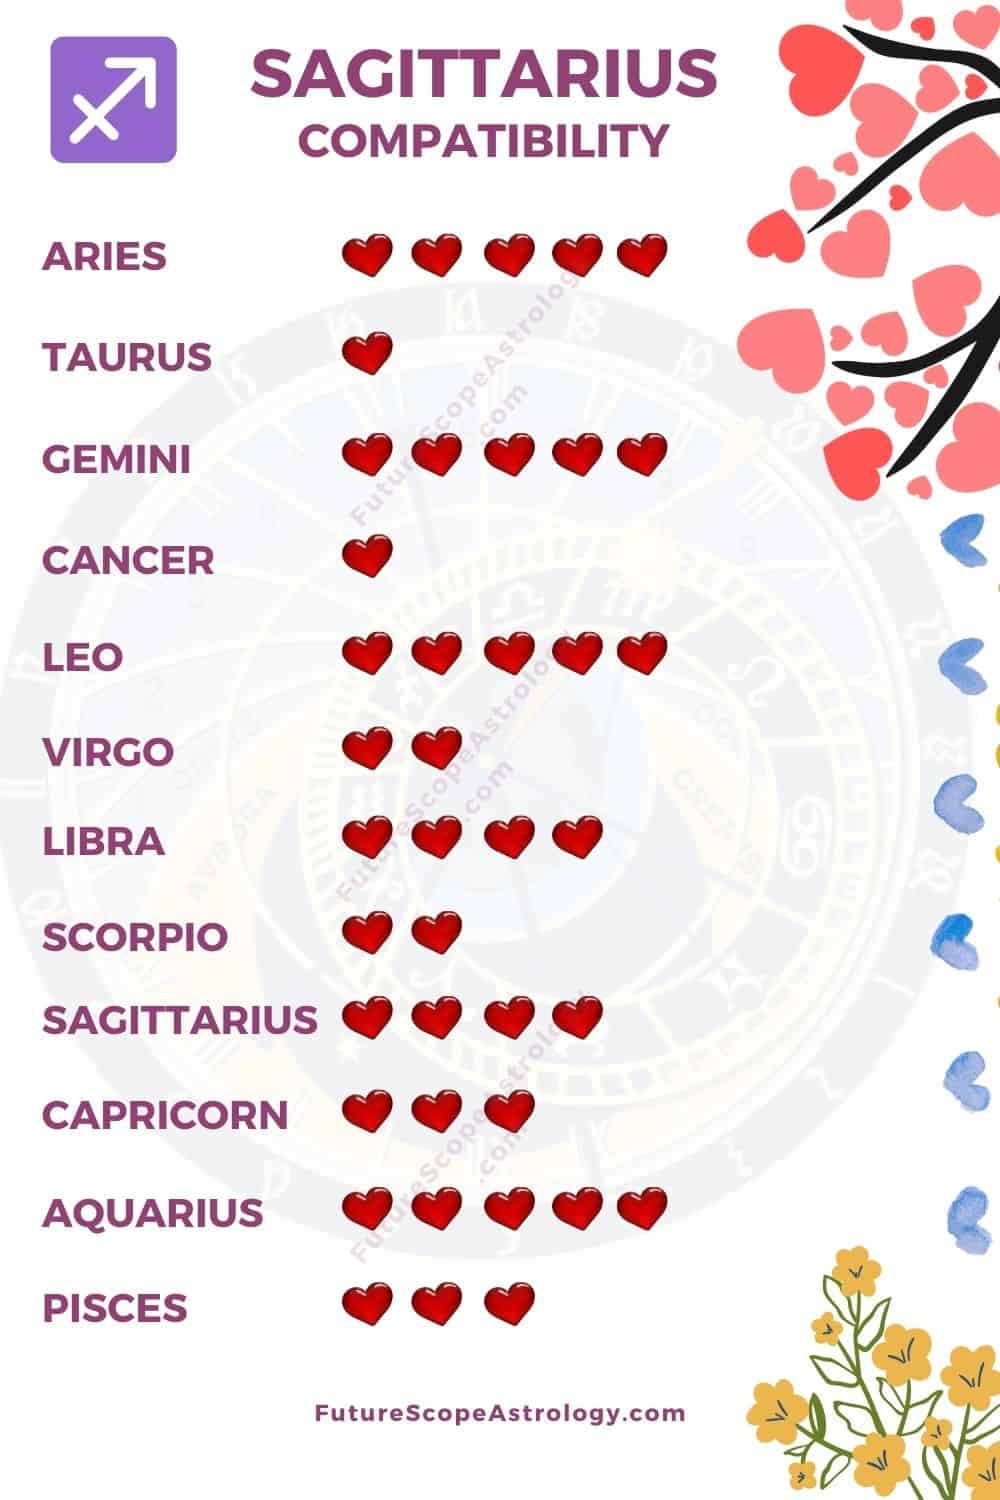 Sagittarius Compatibility love, relationships (all you need to know